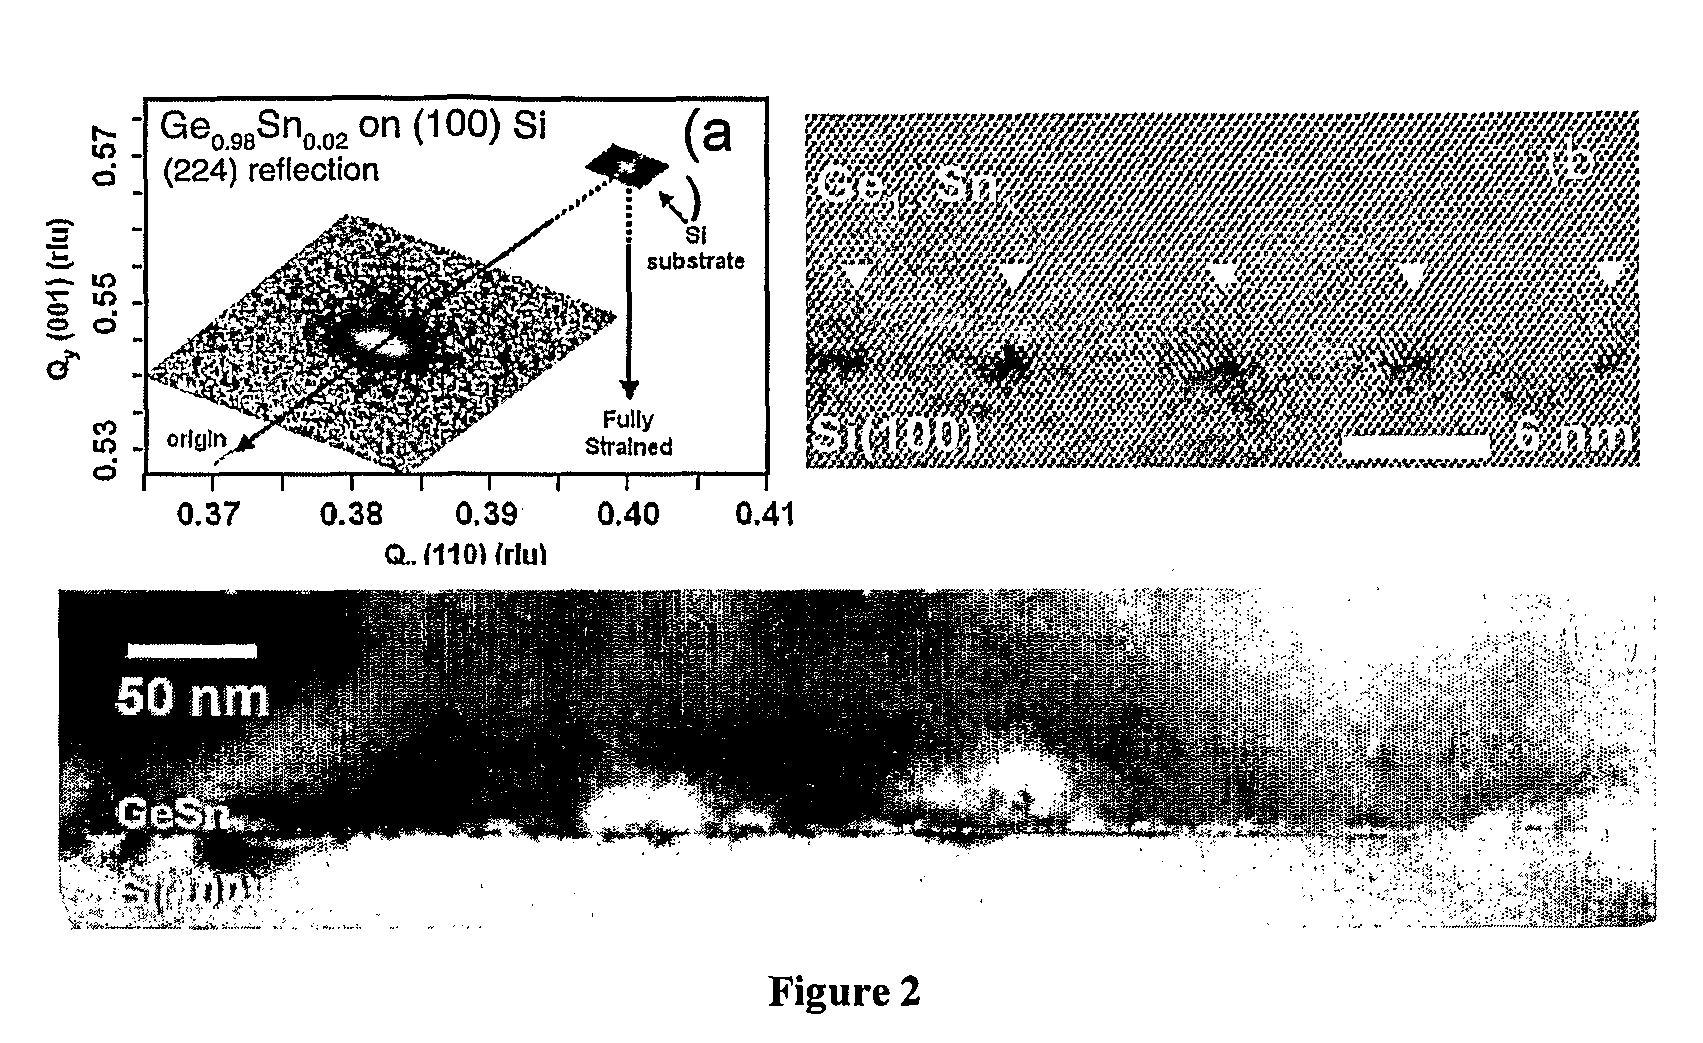 GeSiSn-based compounds, templates, and semiconductor structures